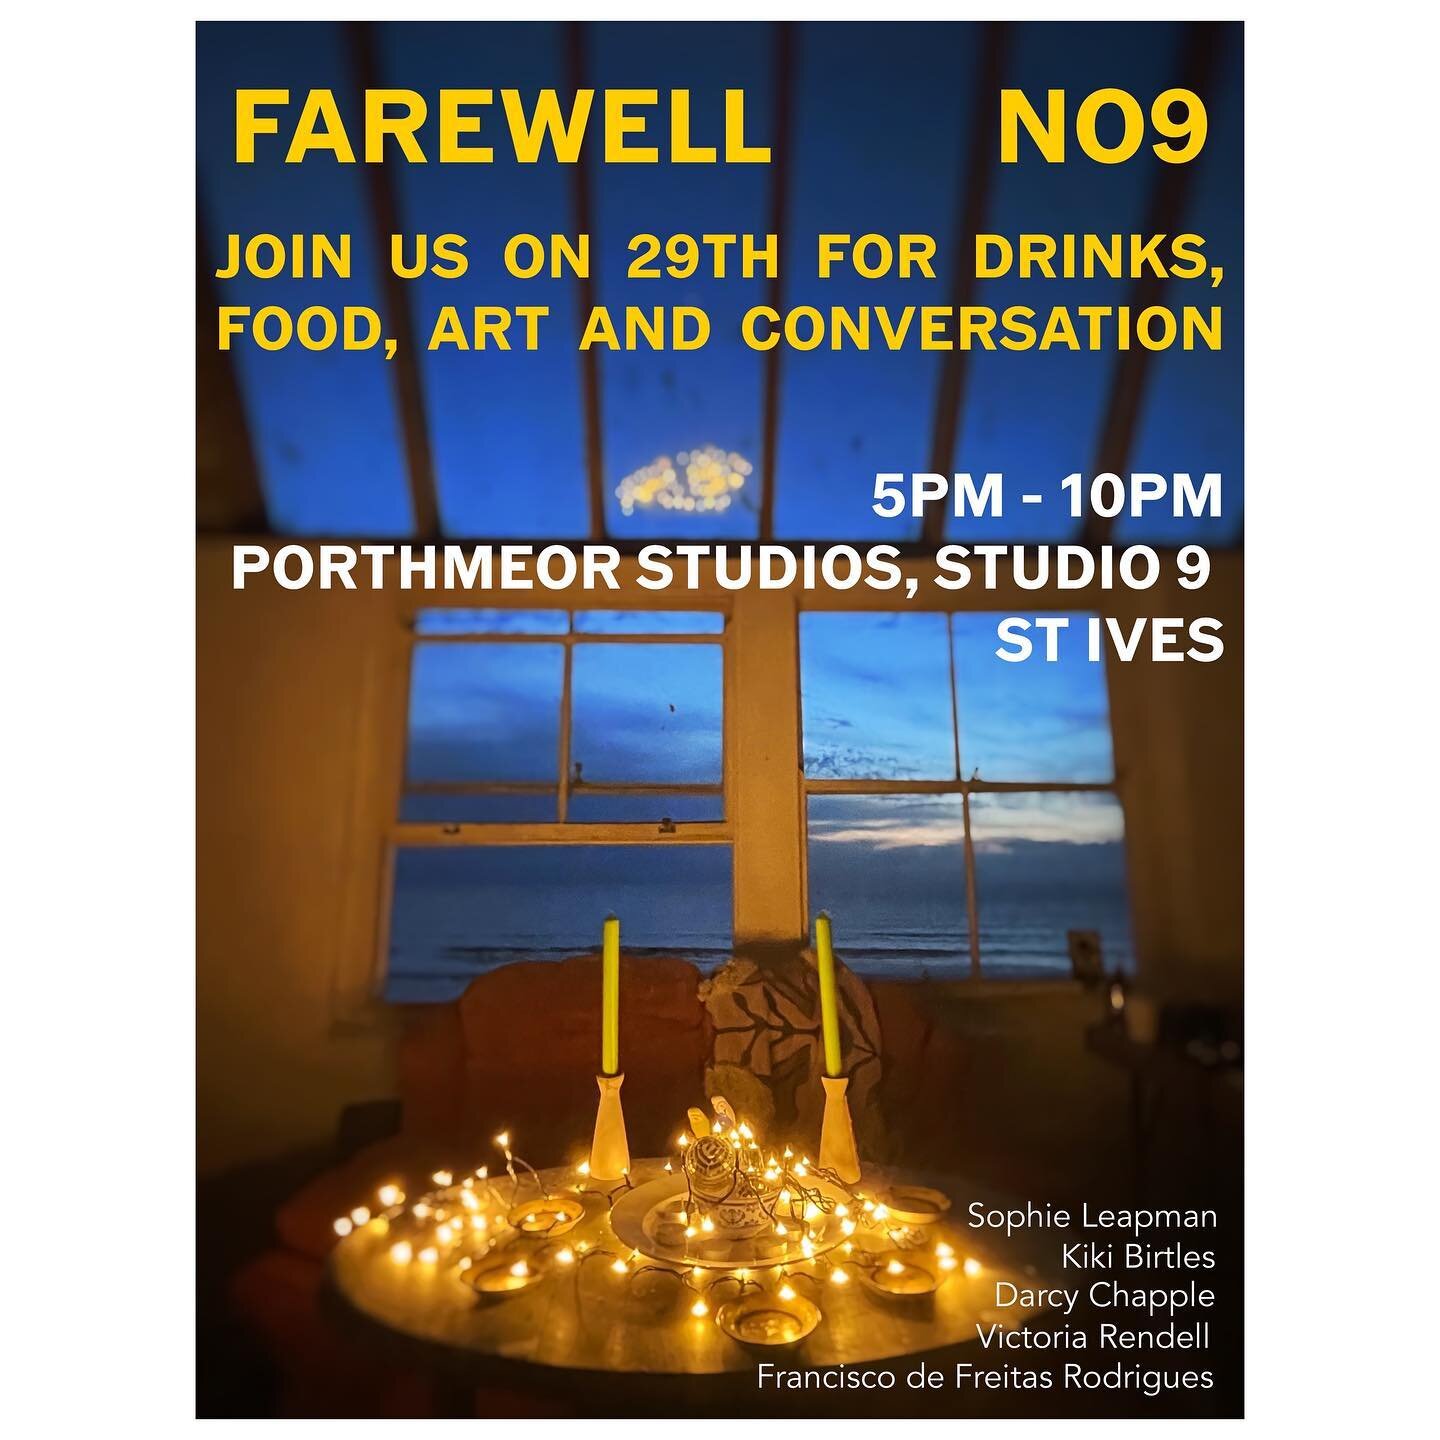 Join us tomorrow for open studios to celebrate the end of our 1 month residency at Studio 9 @porthmeorstudios. If you are around St Ives come say hi🌞

Really grateful for the opportunity to work in such an amazing space with such lovely and talented